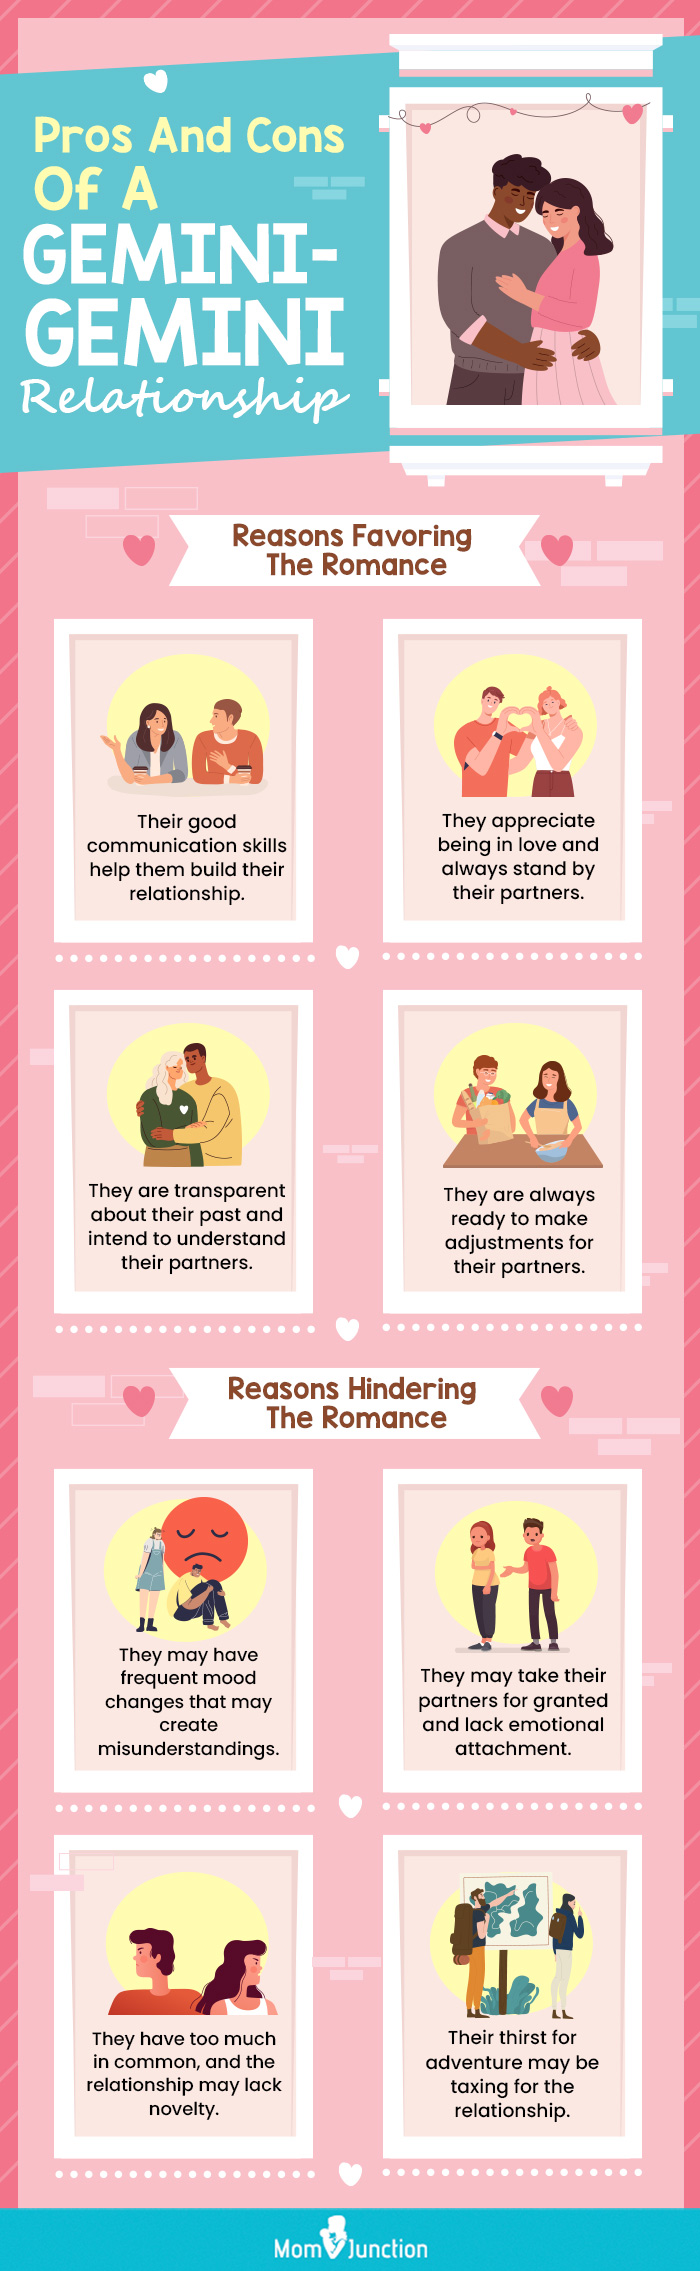 pros and cons of a gemini gemini relationship (infographic)